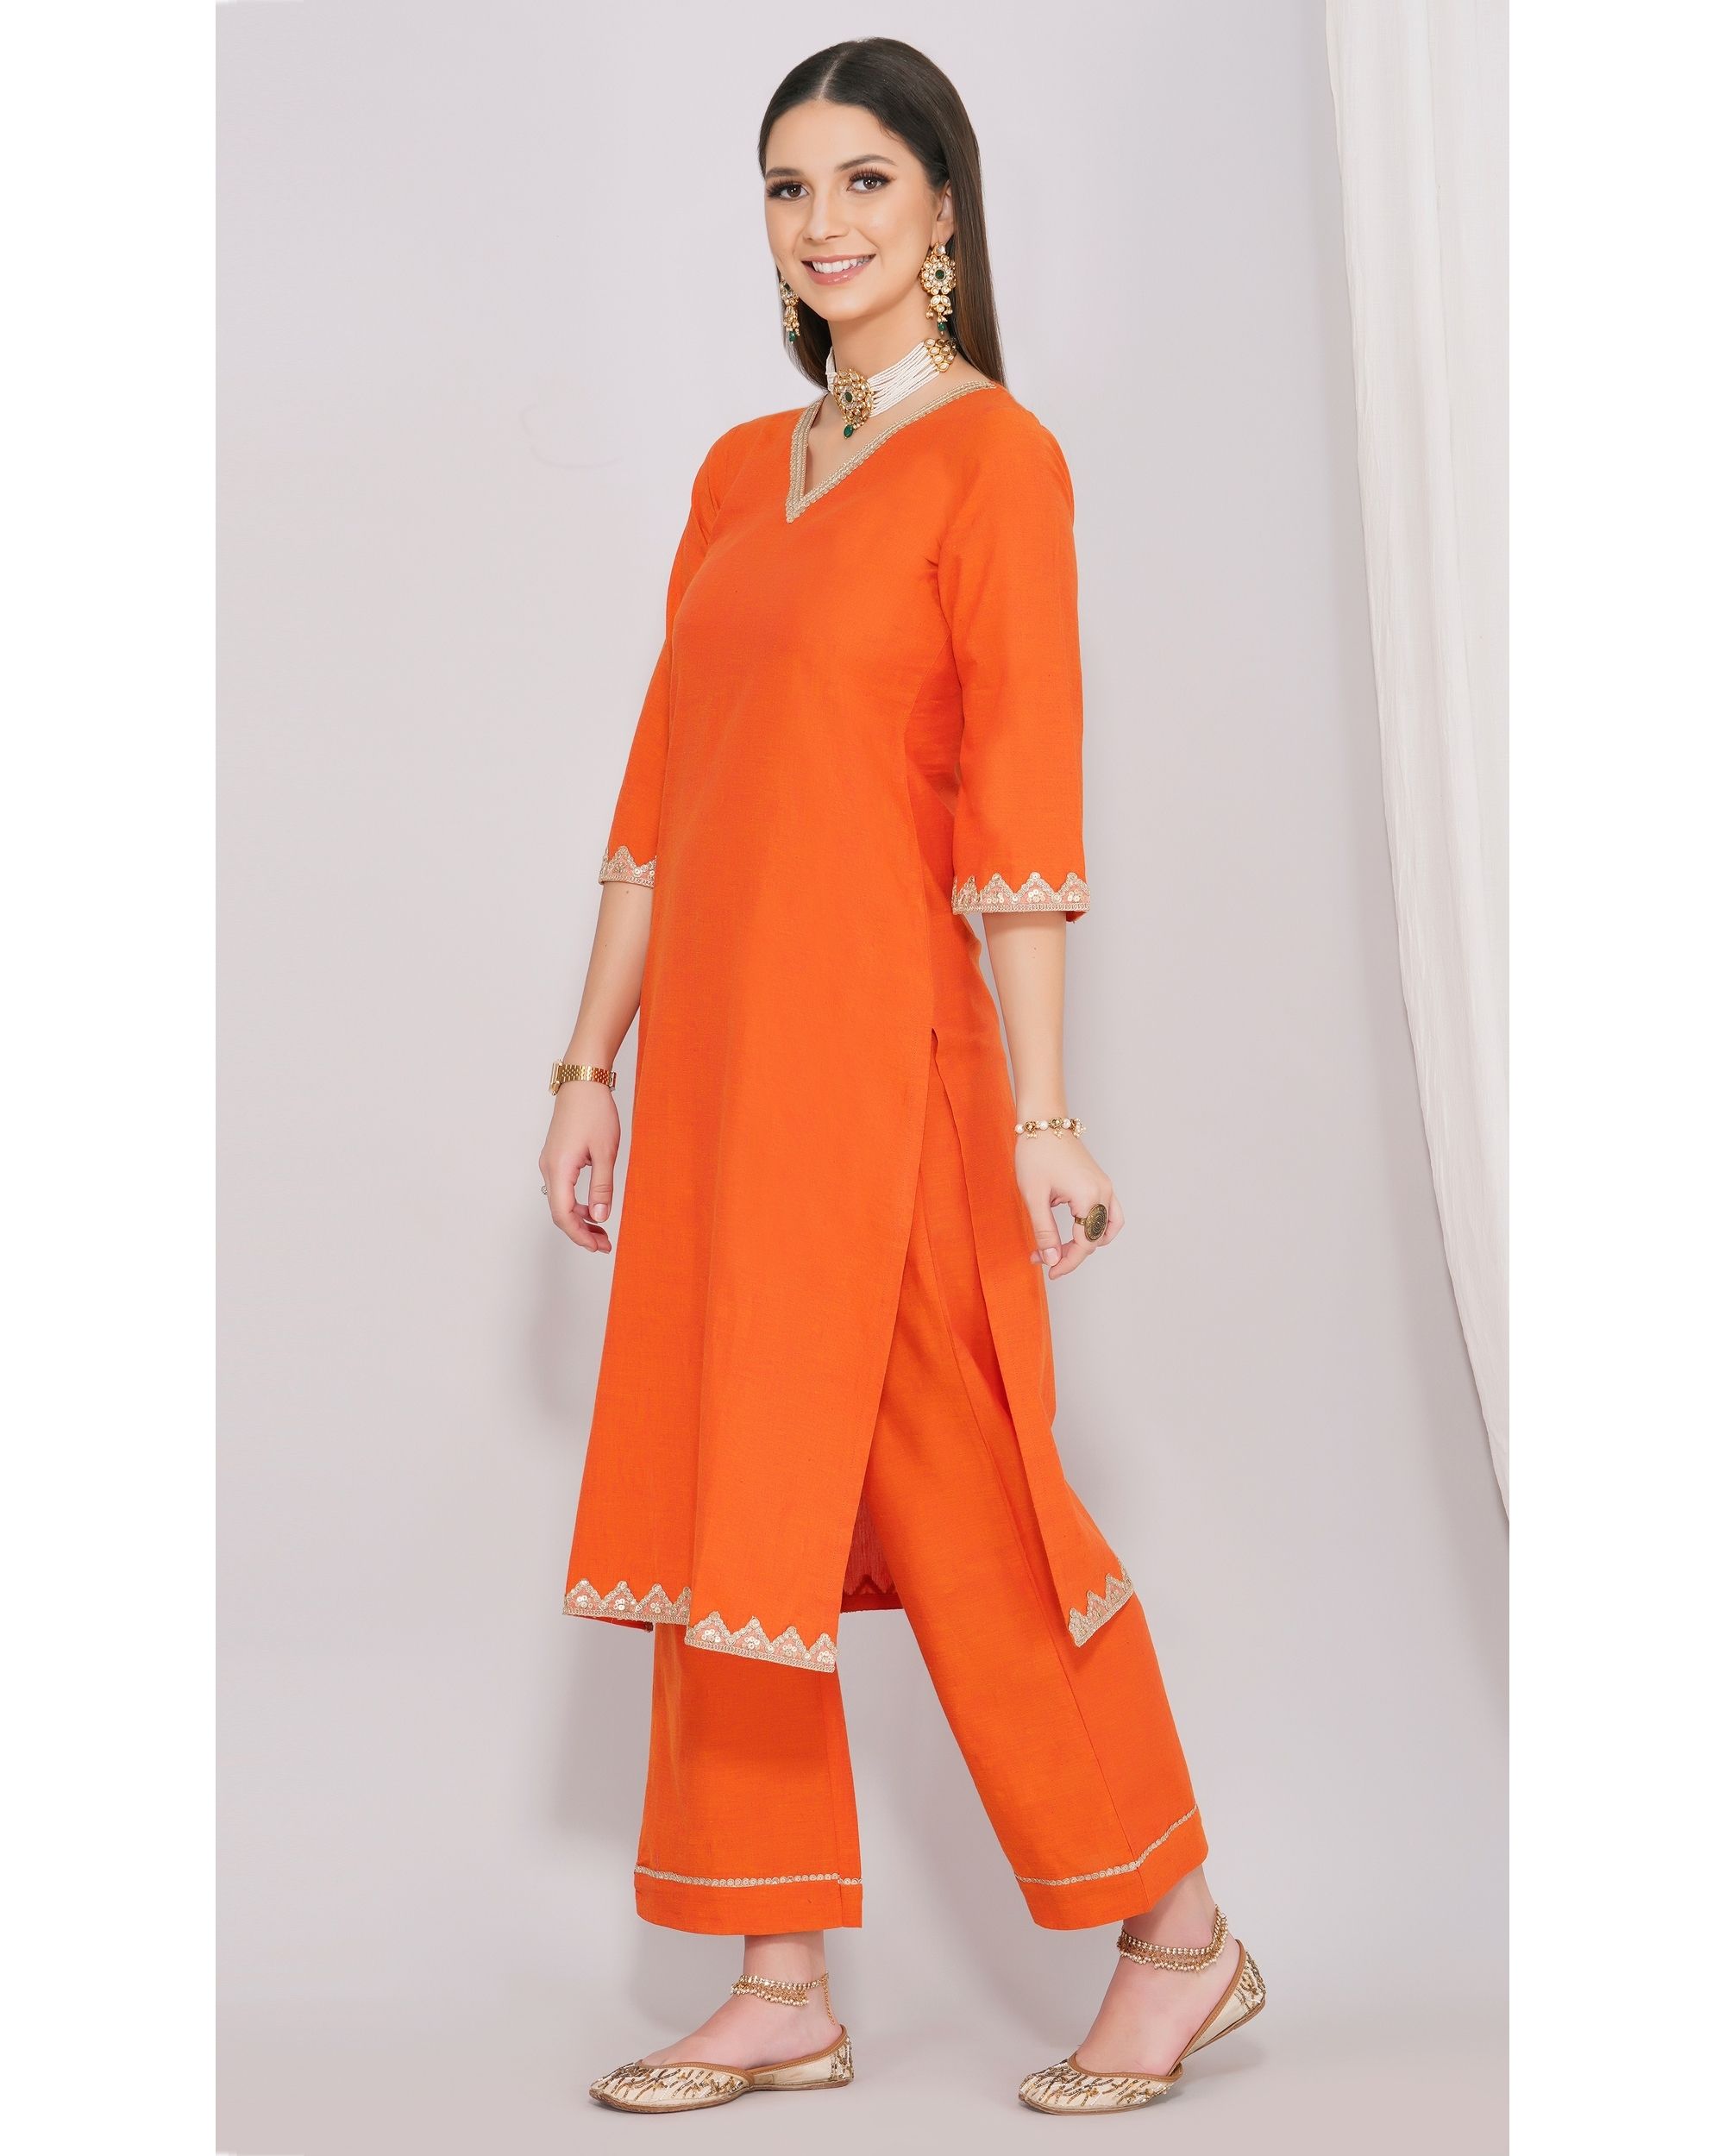 Orange Stitched Rayon Palazzo Suit, Size: S-xxl at Rs 2000/piece in Pushkar